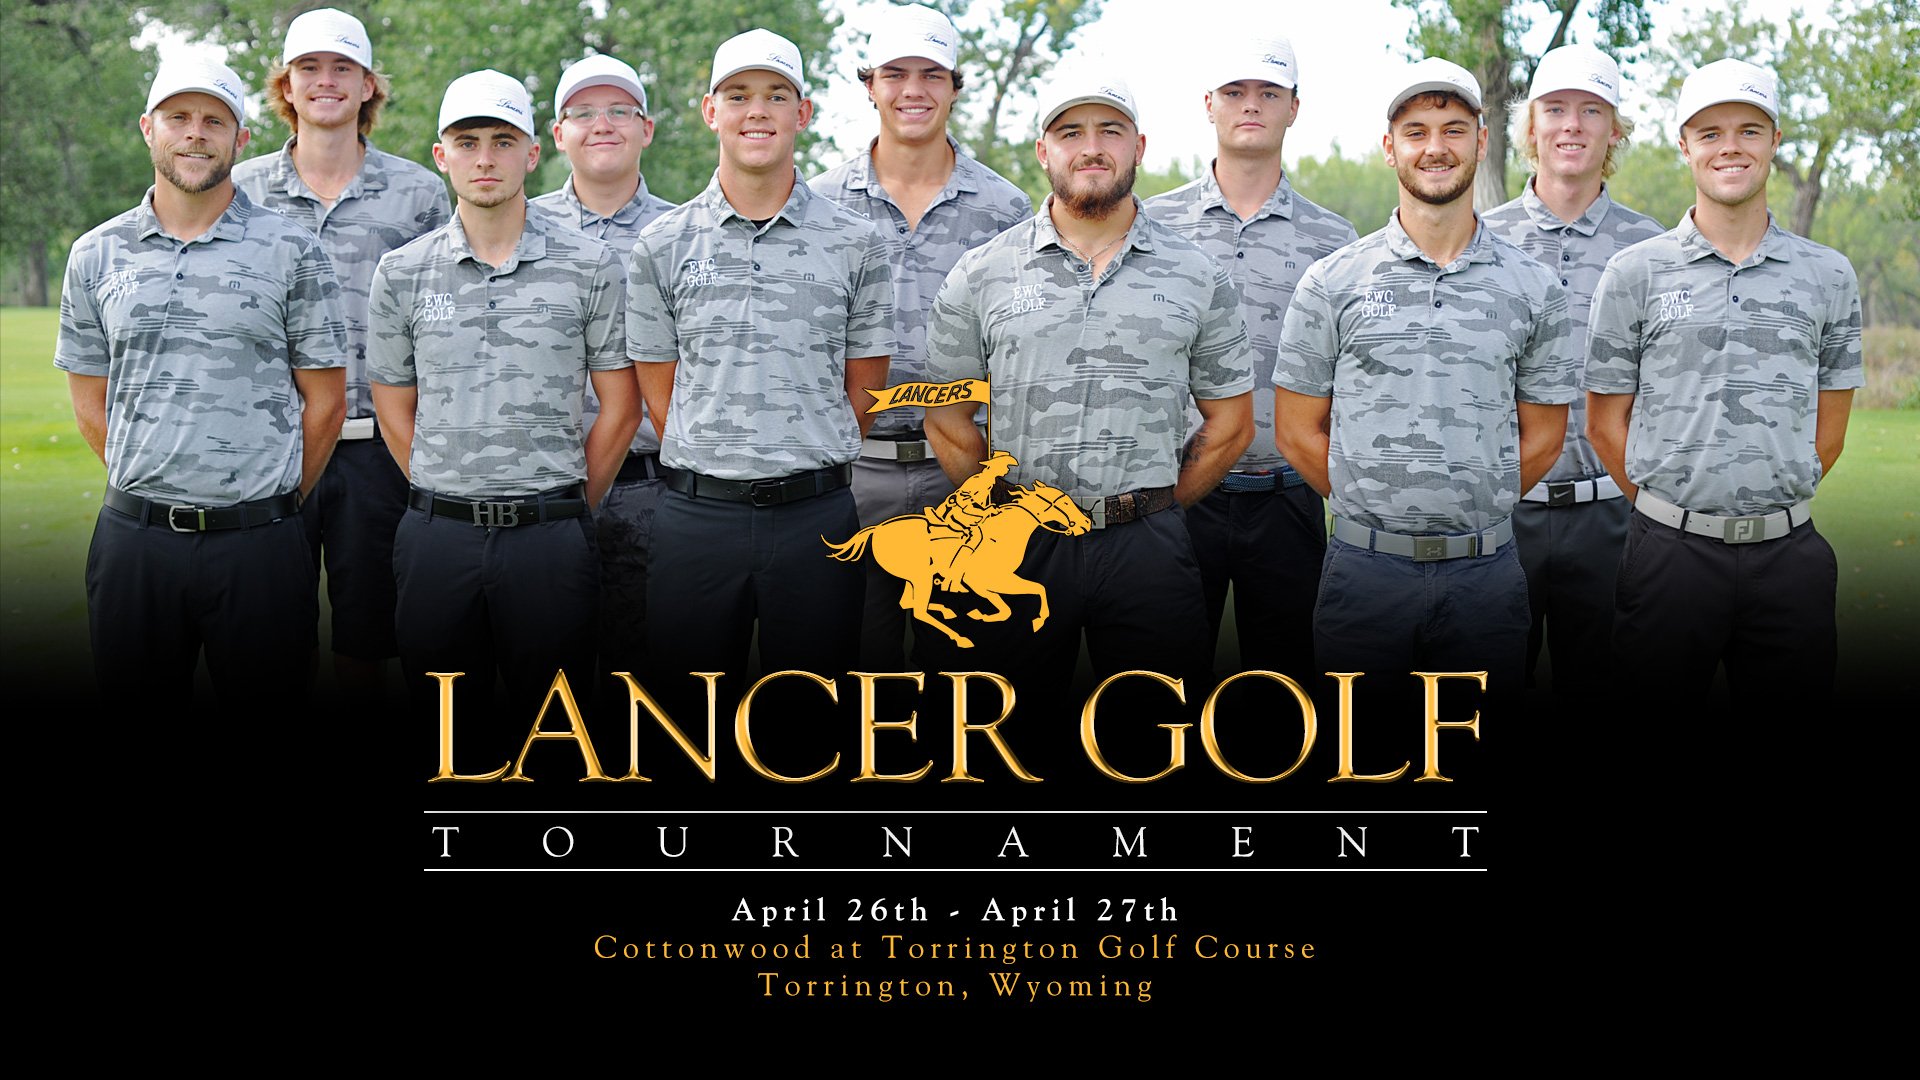 Eastern Wyoming College - Lancer Golf Tournament - April 26th - April 27th